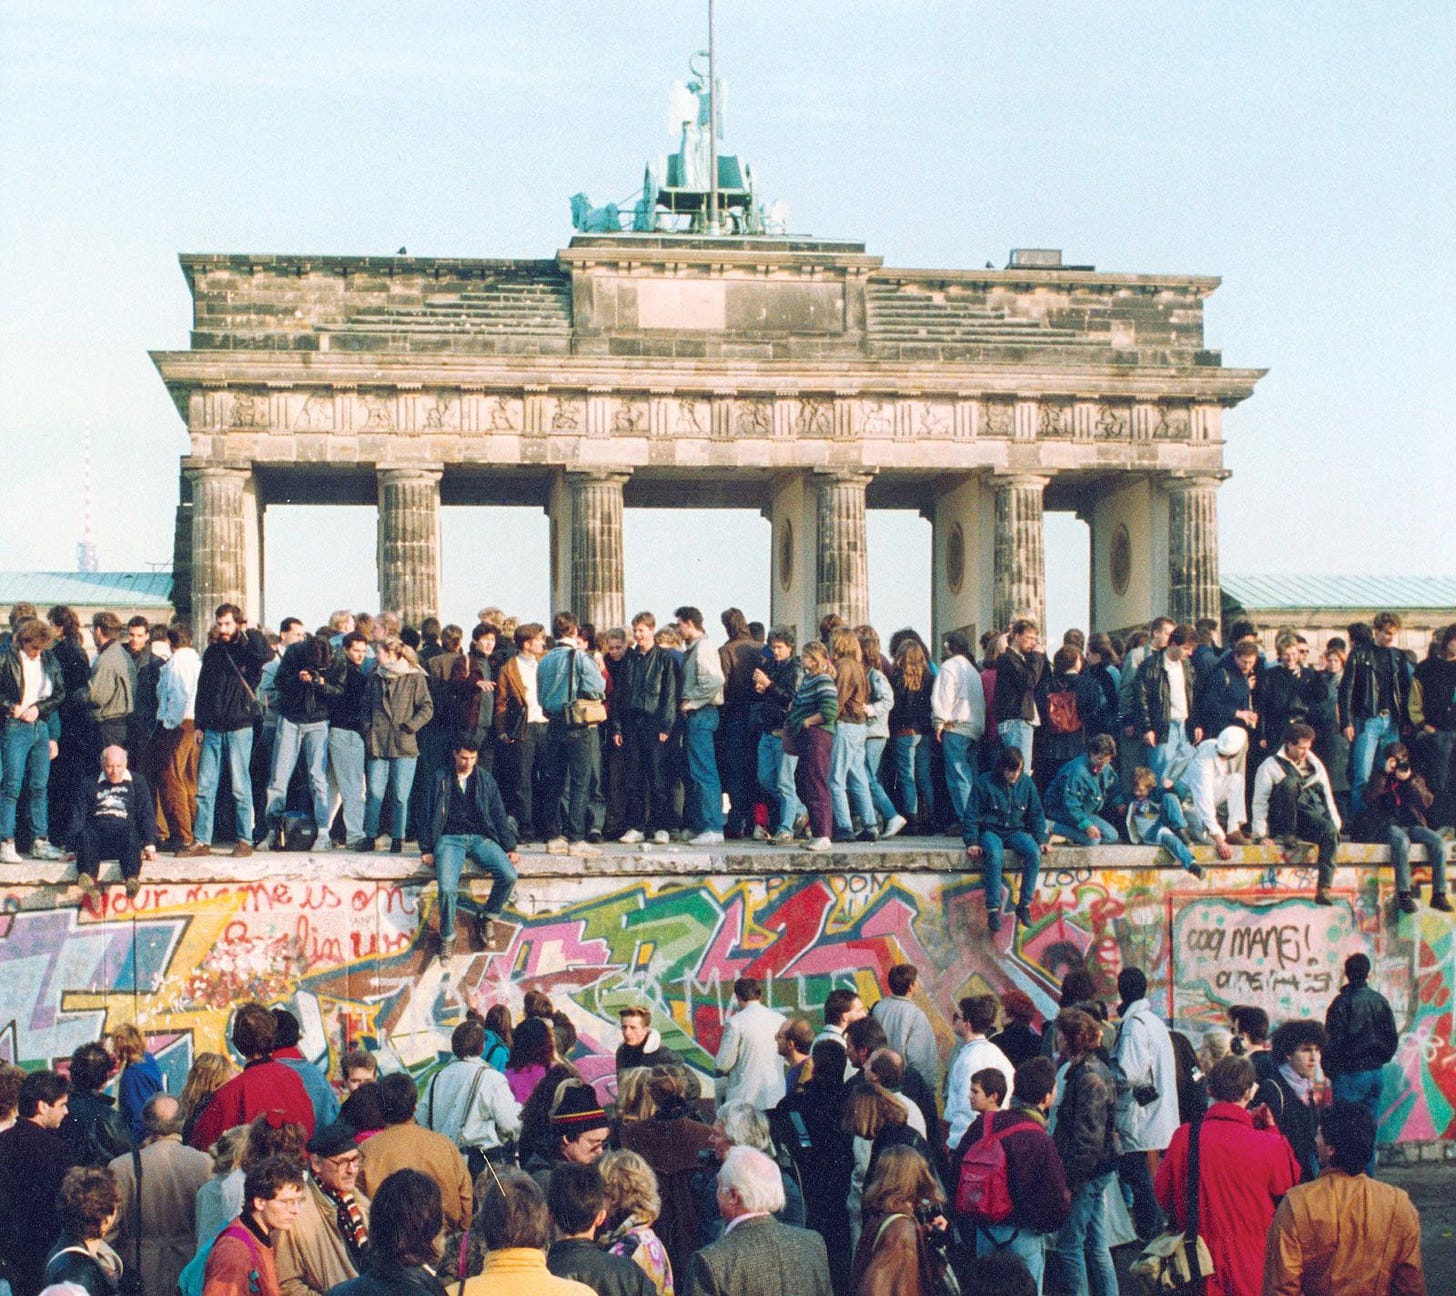 Berlin Wall | Definition, Length, & Facts | Britannica